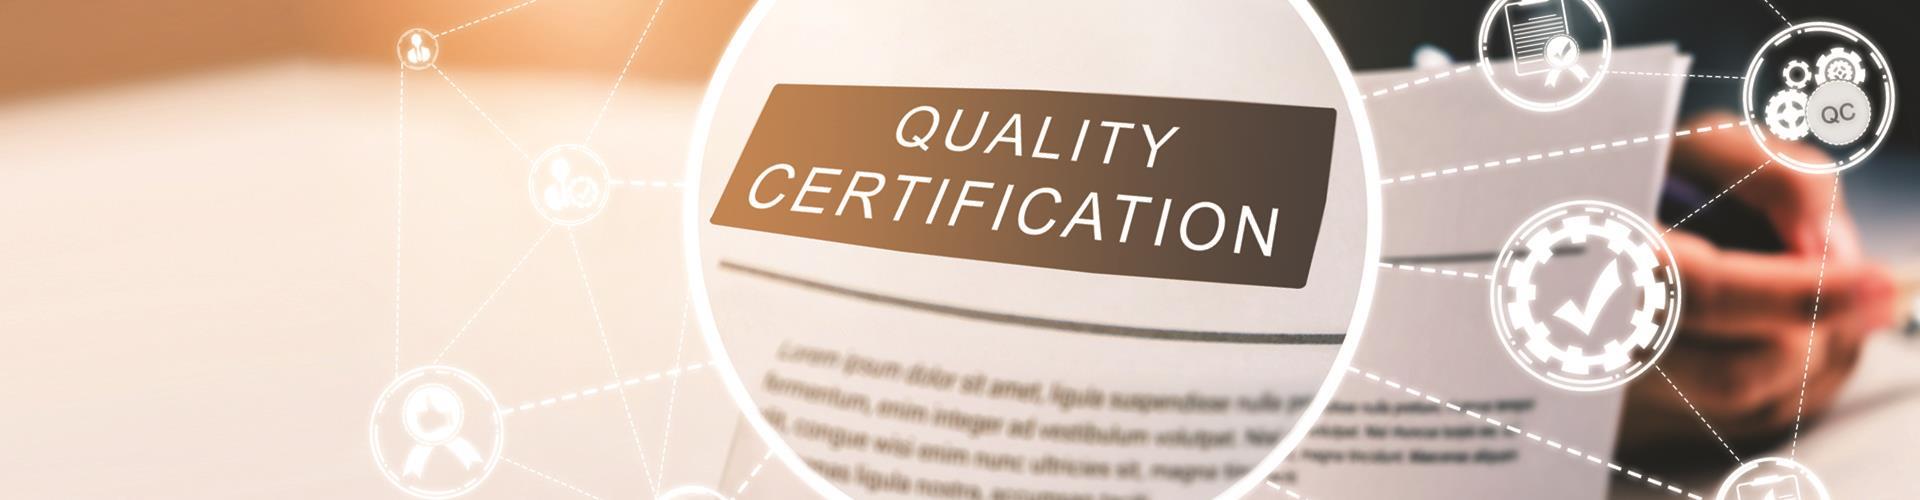 quality_certification